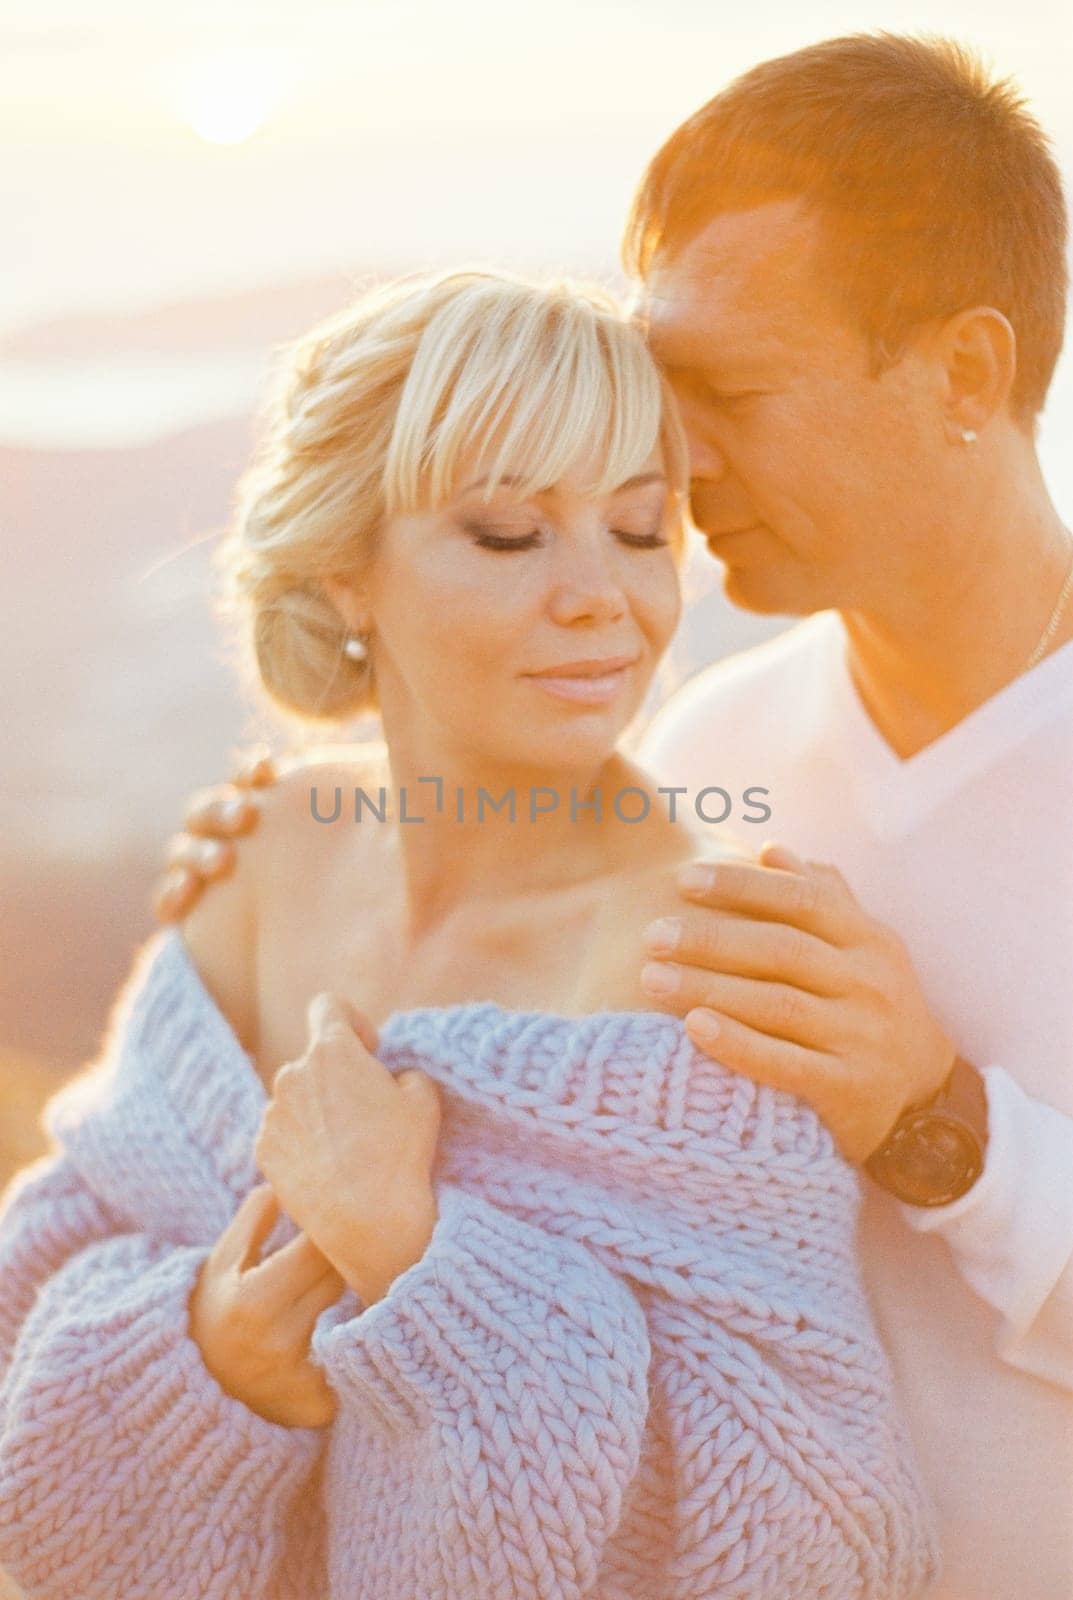 Man hugs woman from behind by the shoulders, touching her temple with his face. High quality photo